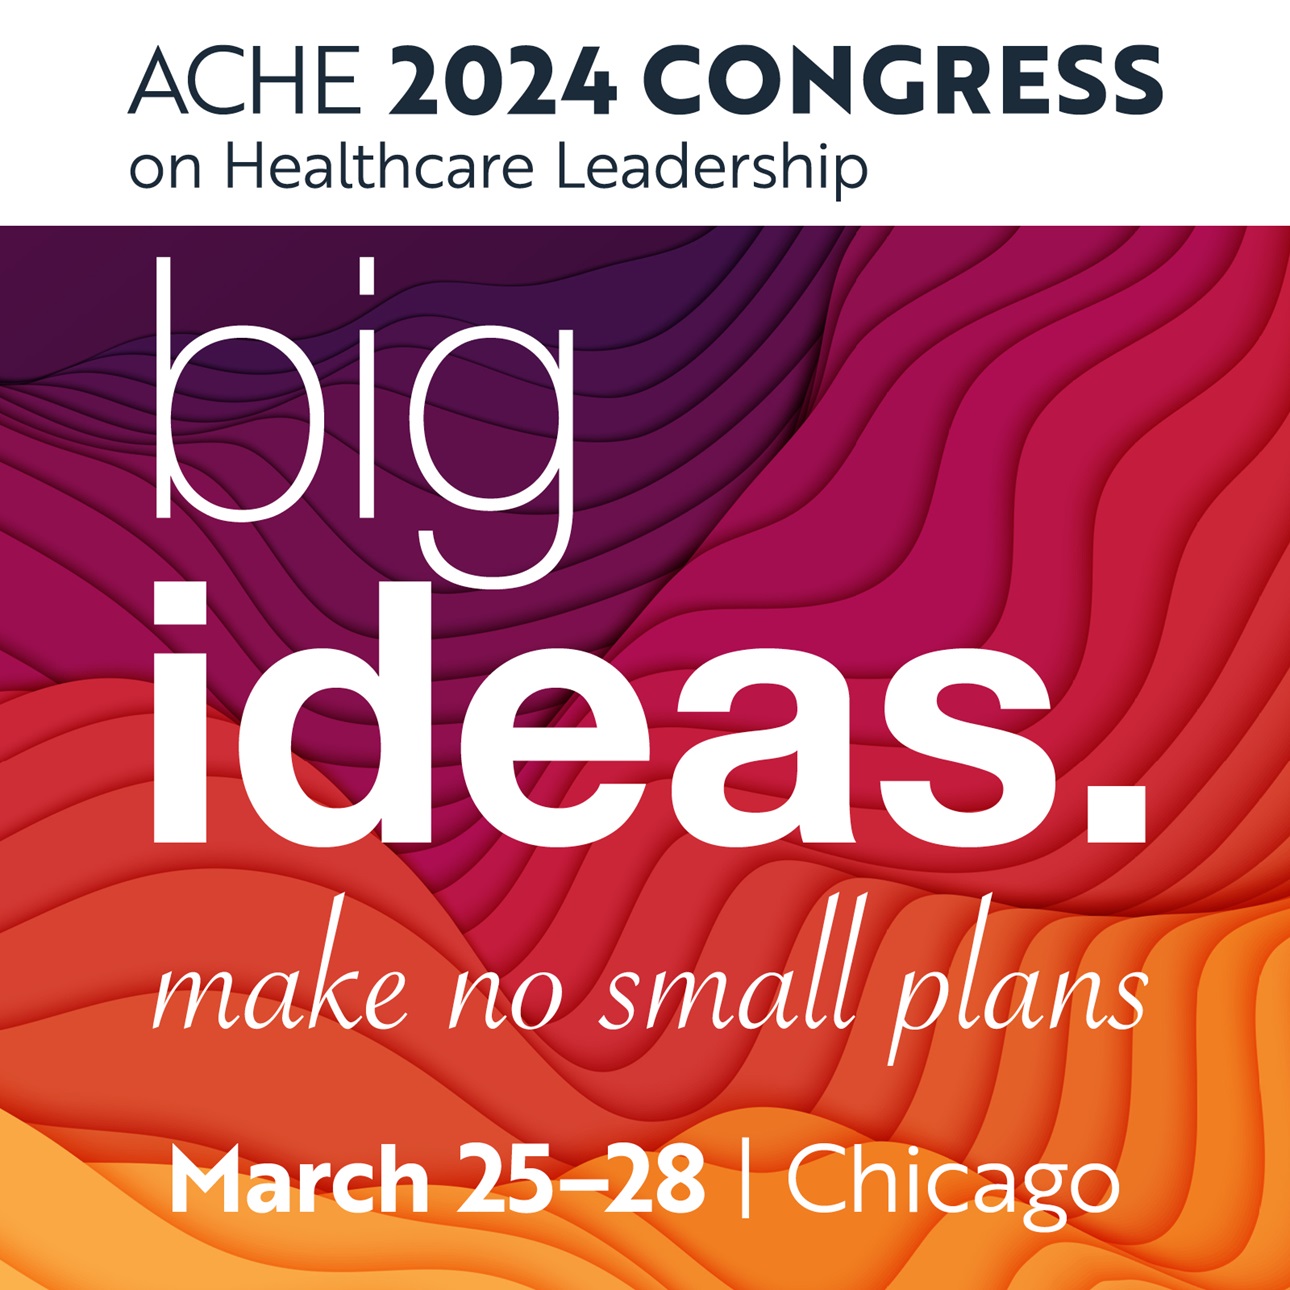 4 Reasons to Attend This Year’s Congress on Healthcare Leadership